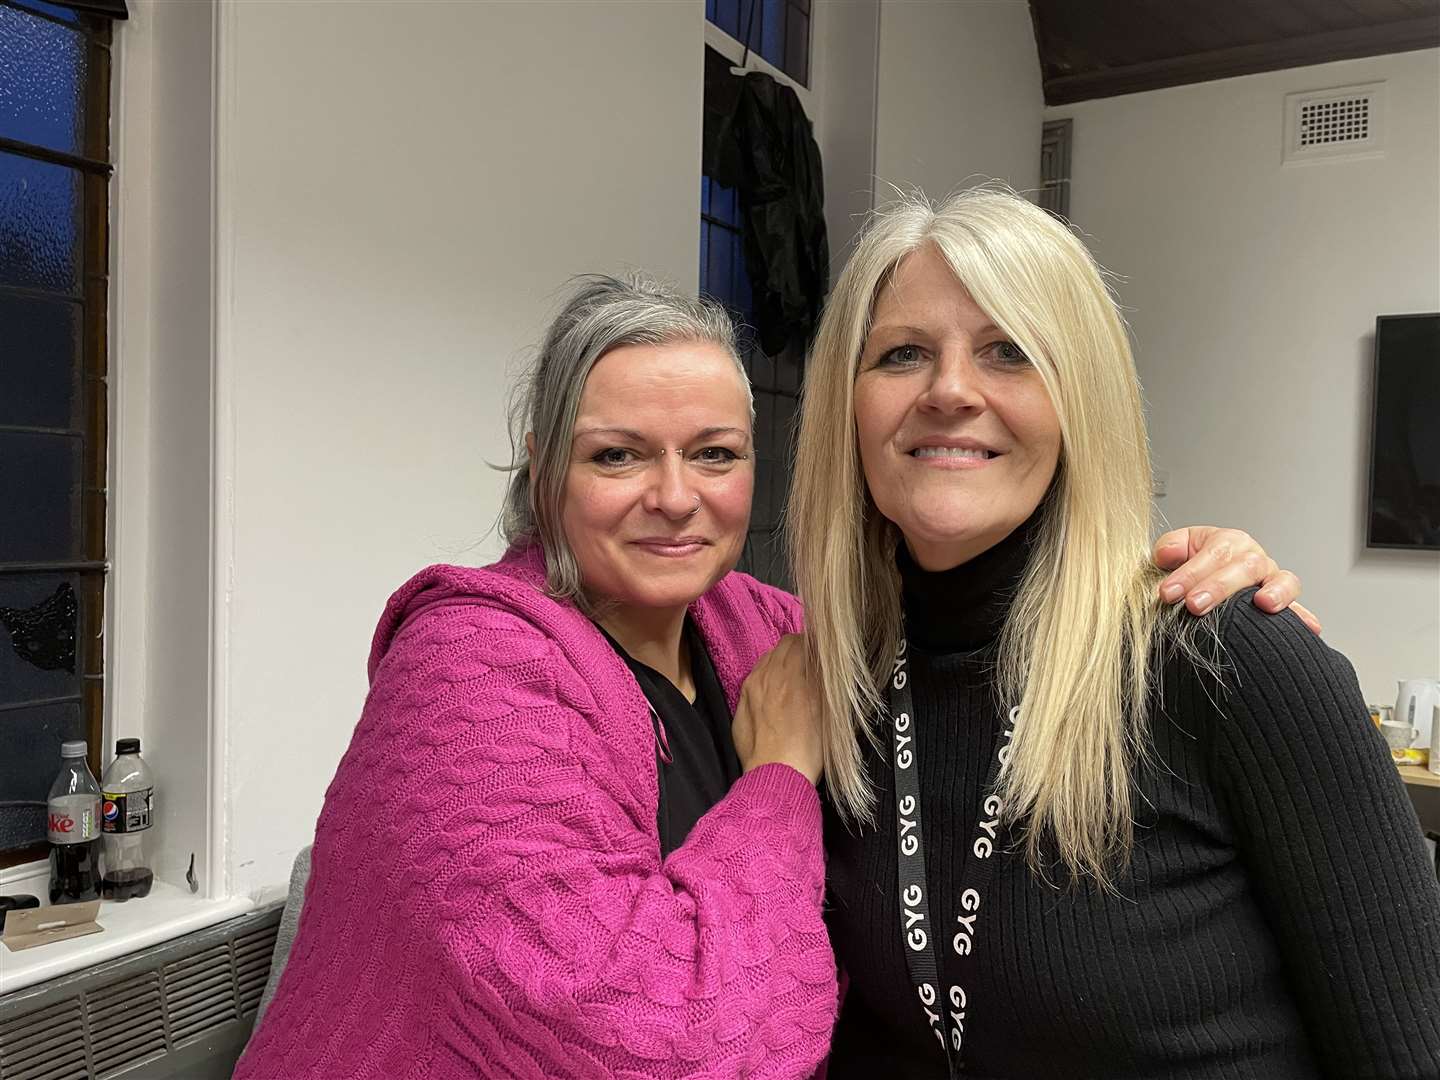 From left: Youth work specialist Caroline McNally-Johnson and senior youth work manager Jackie Coupar